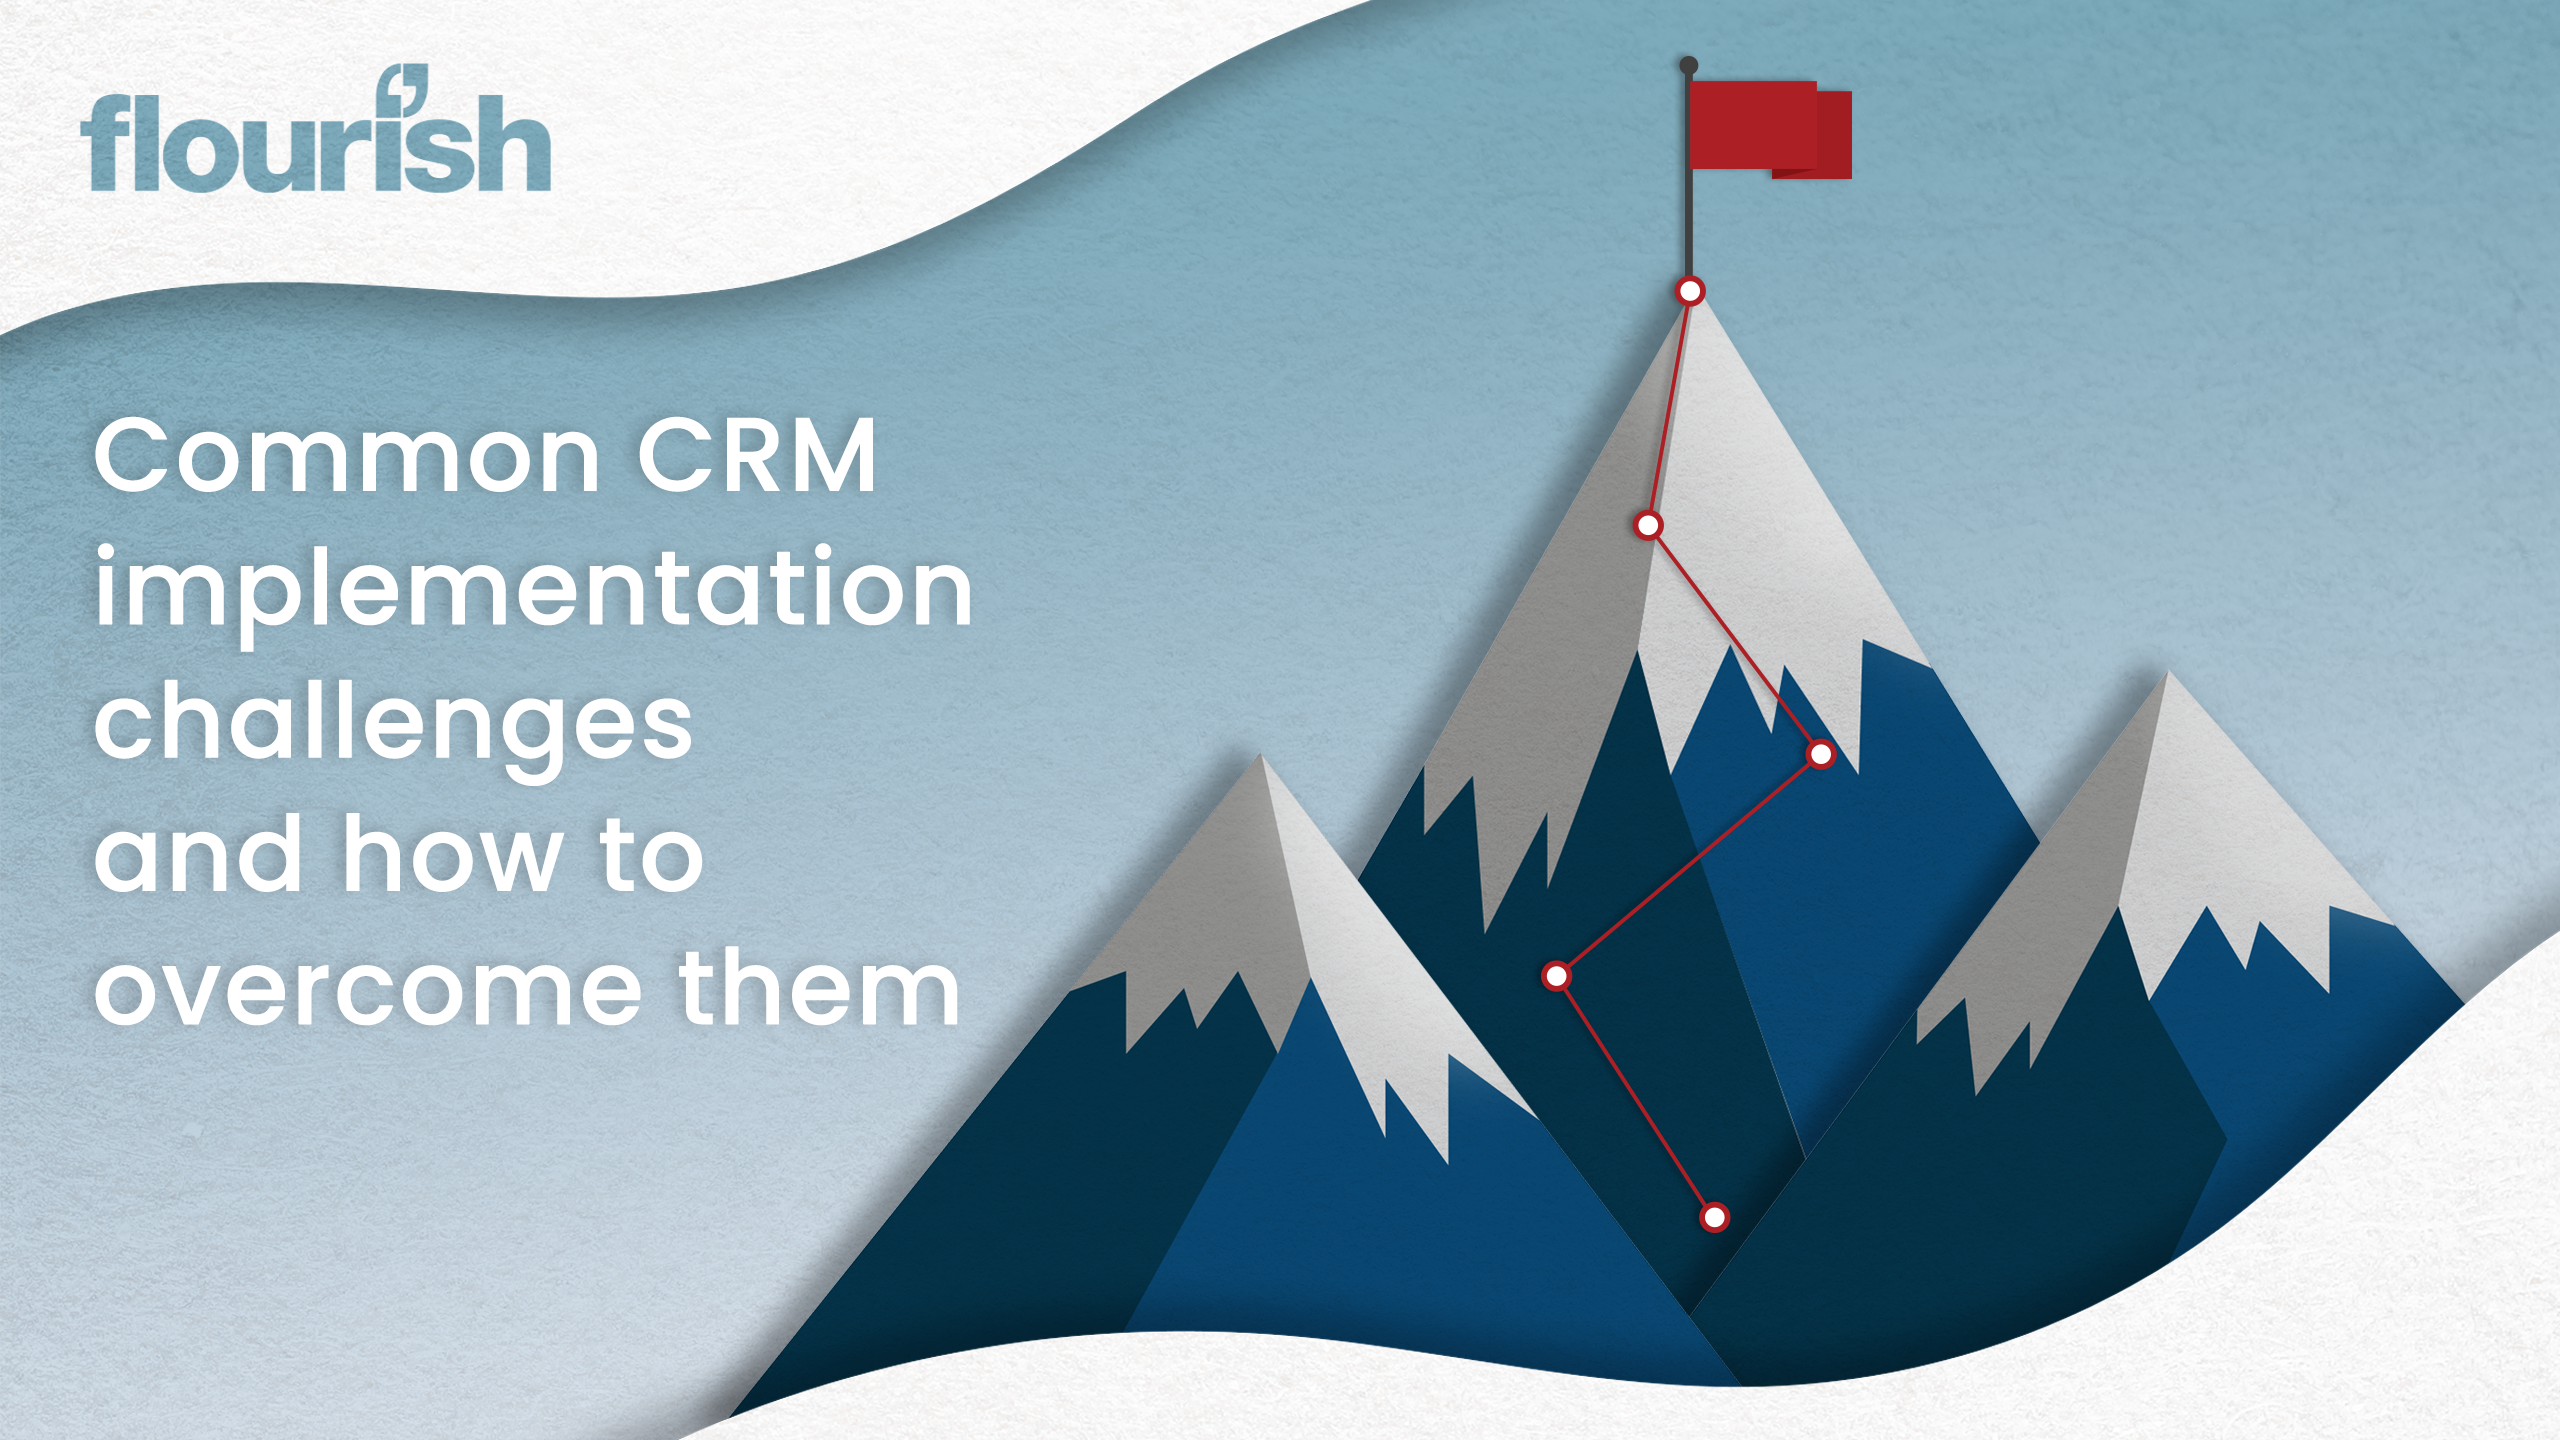 Common CRM implementations challenges and how to overcome them